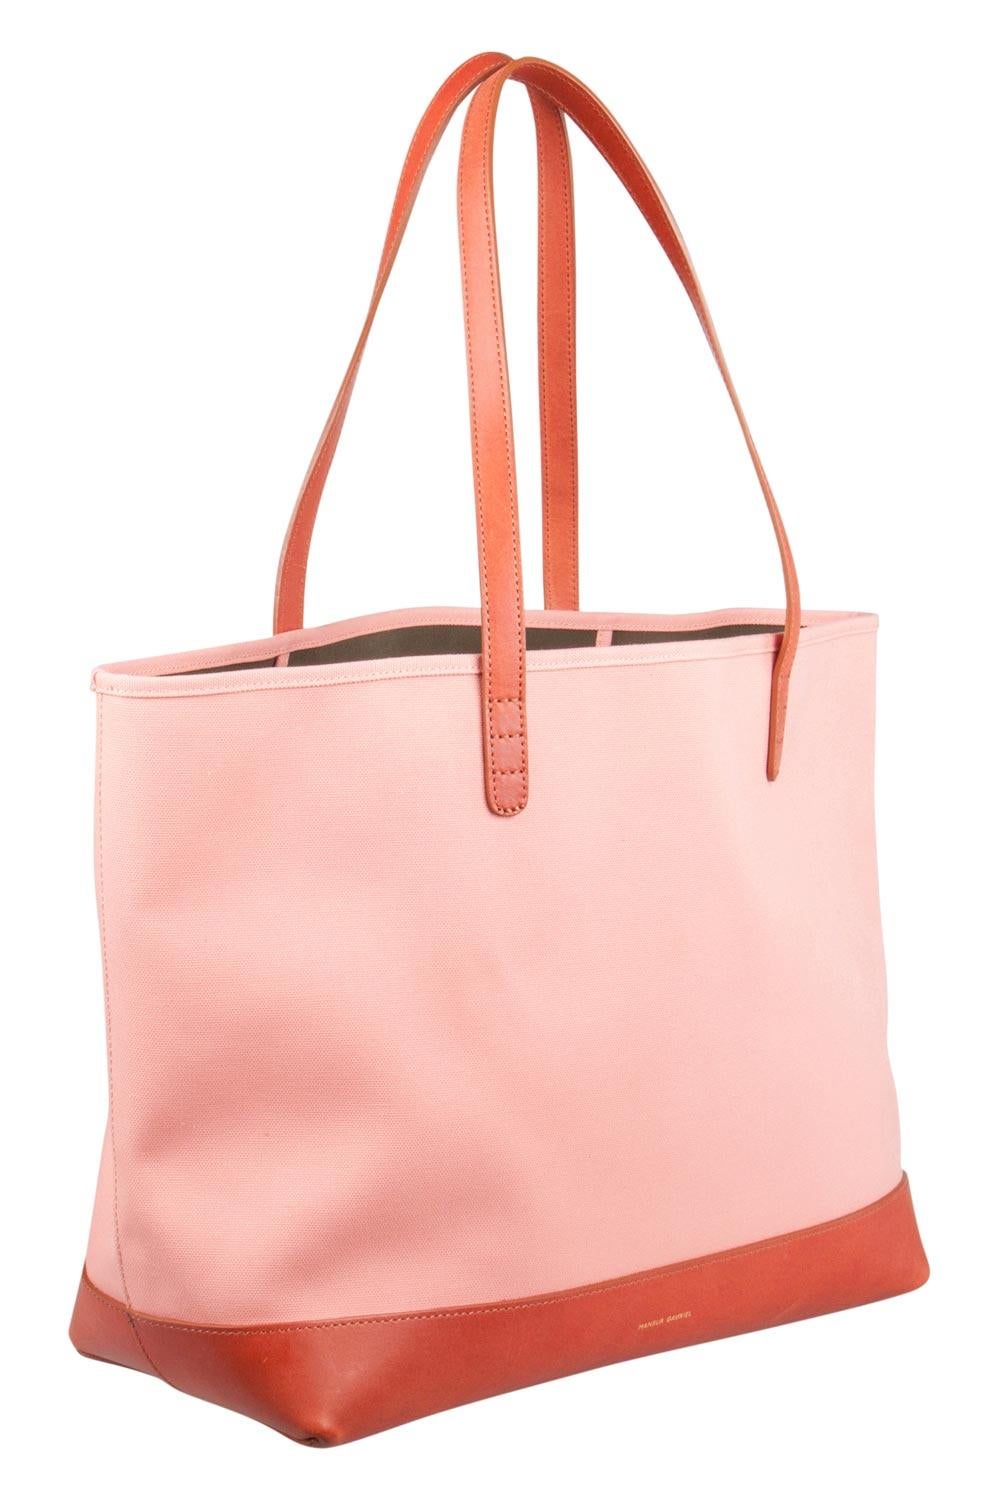 Pink Mansur Gavriel Peach/Brown Canvas and Leather Large Tote